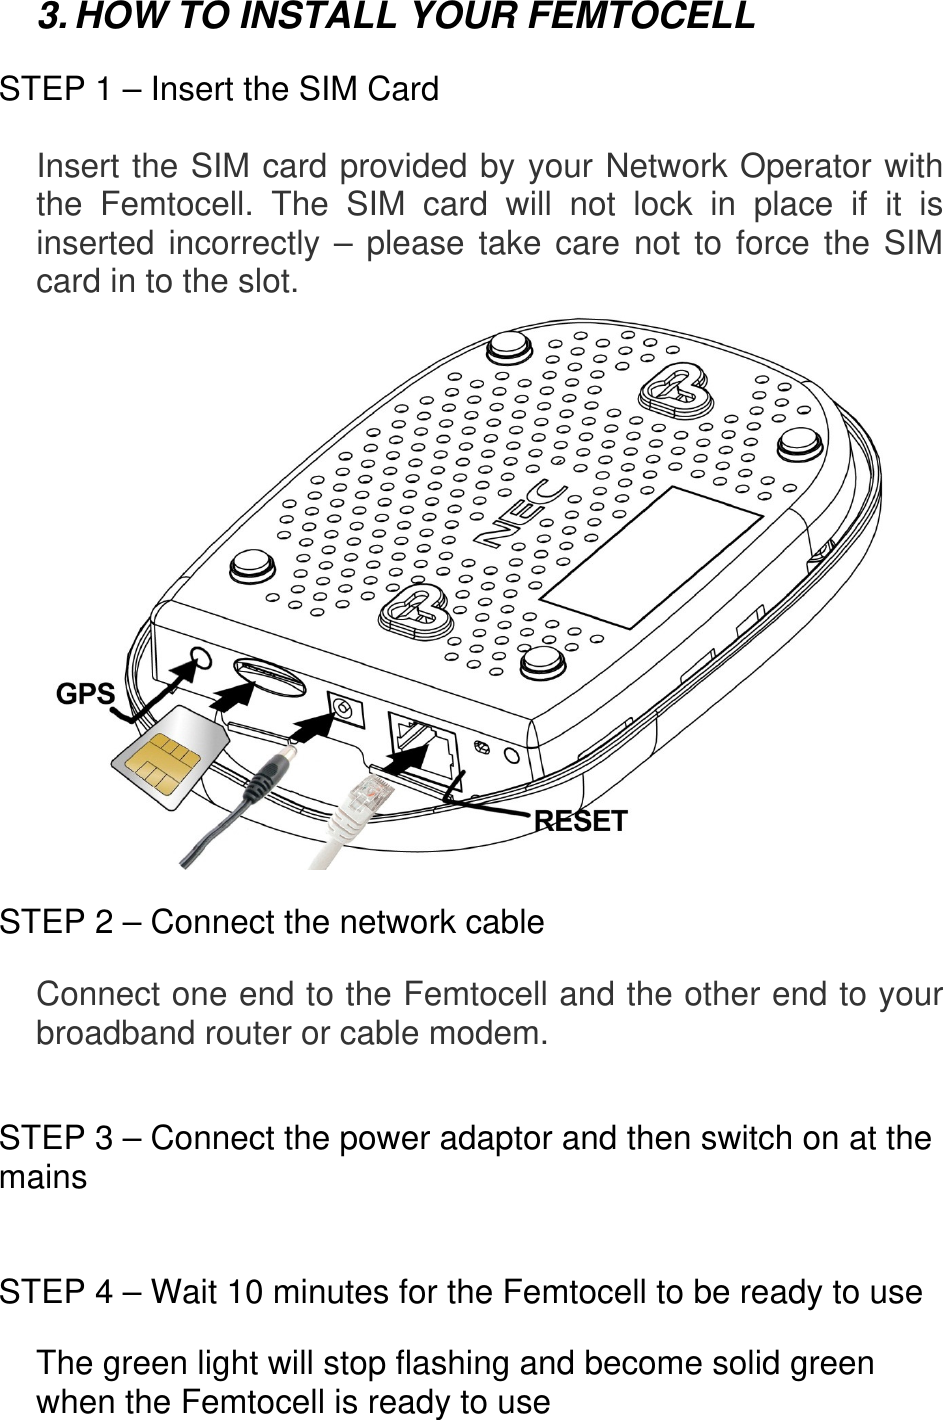 3. HOW TO INSTALL YOUR FEMTOCELL  STEP 1 – Insert the SIM Card  Insert the SIM card provided by your Network Operator with the Femtocell. The SIM card will not lock in place if it is inserted incorrectly – please take care not to force the SIM card in to the slot.   STEP 2 – Connect the network cable  Connect one end to the Femtocell and the other end to your broadband router or cable modem.   STEP 3 – Connect the power adaptor and then switch on at the mains   STEP 4 – Wait 10 minutes for the Femtocell to be ready to use  The green light will stop flashing and become solid green when the Femtocell is ready to use    